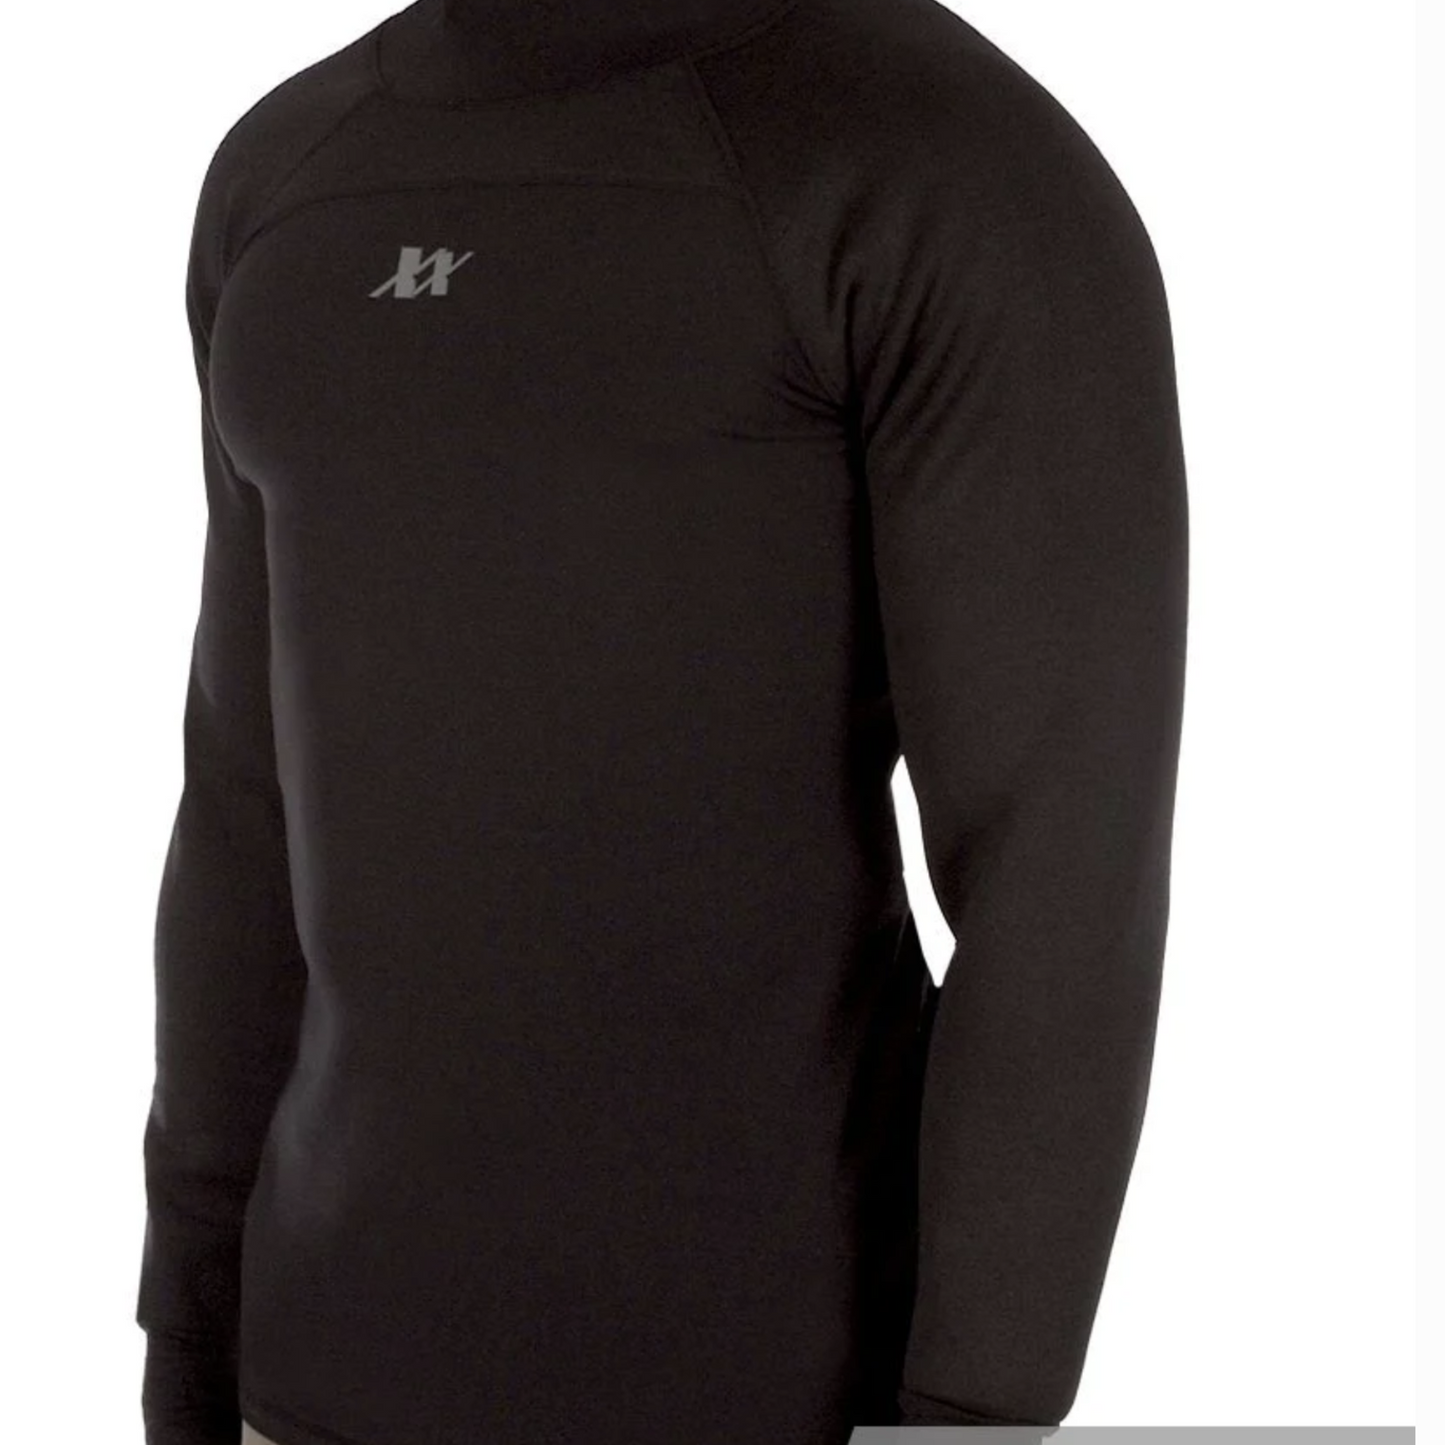 Equinoxx Stage 3 Thermal Shirt